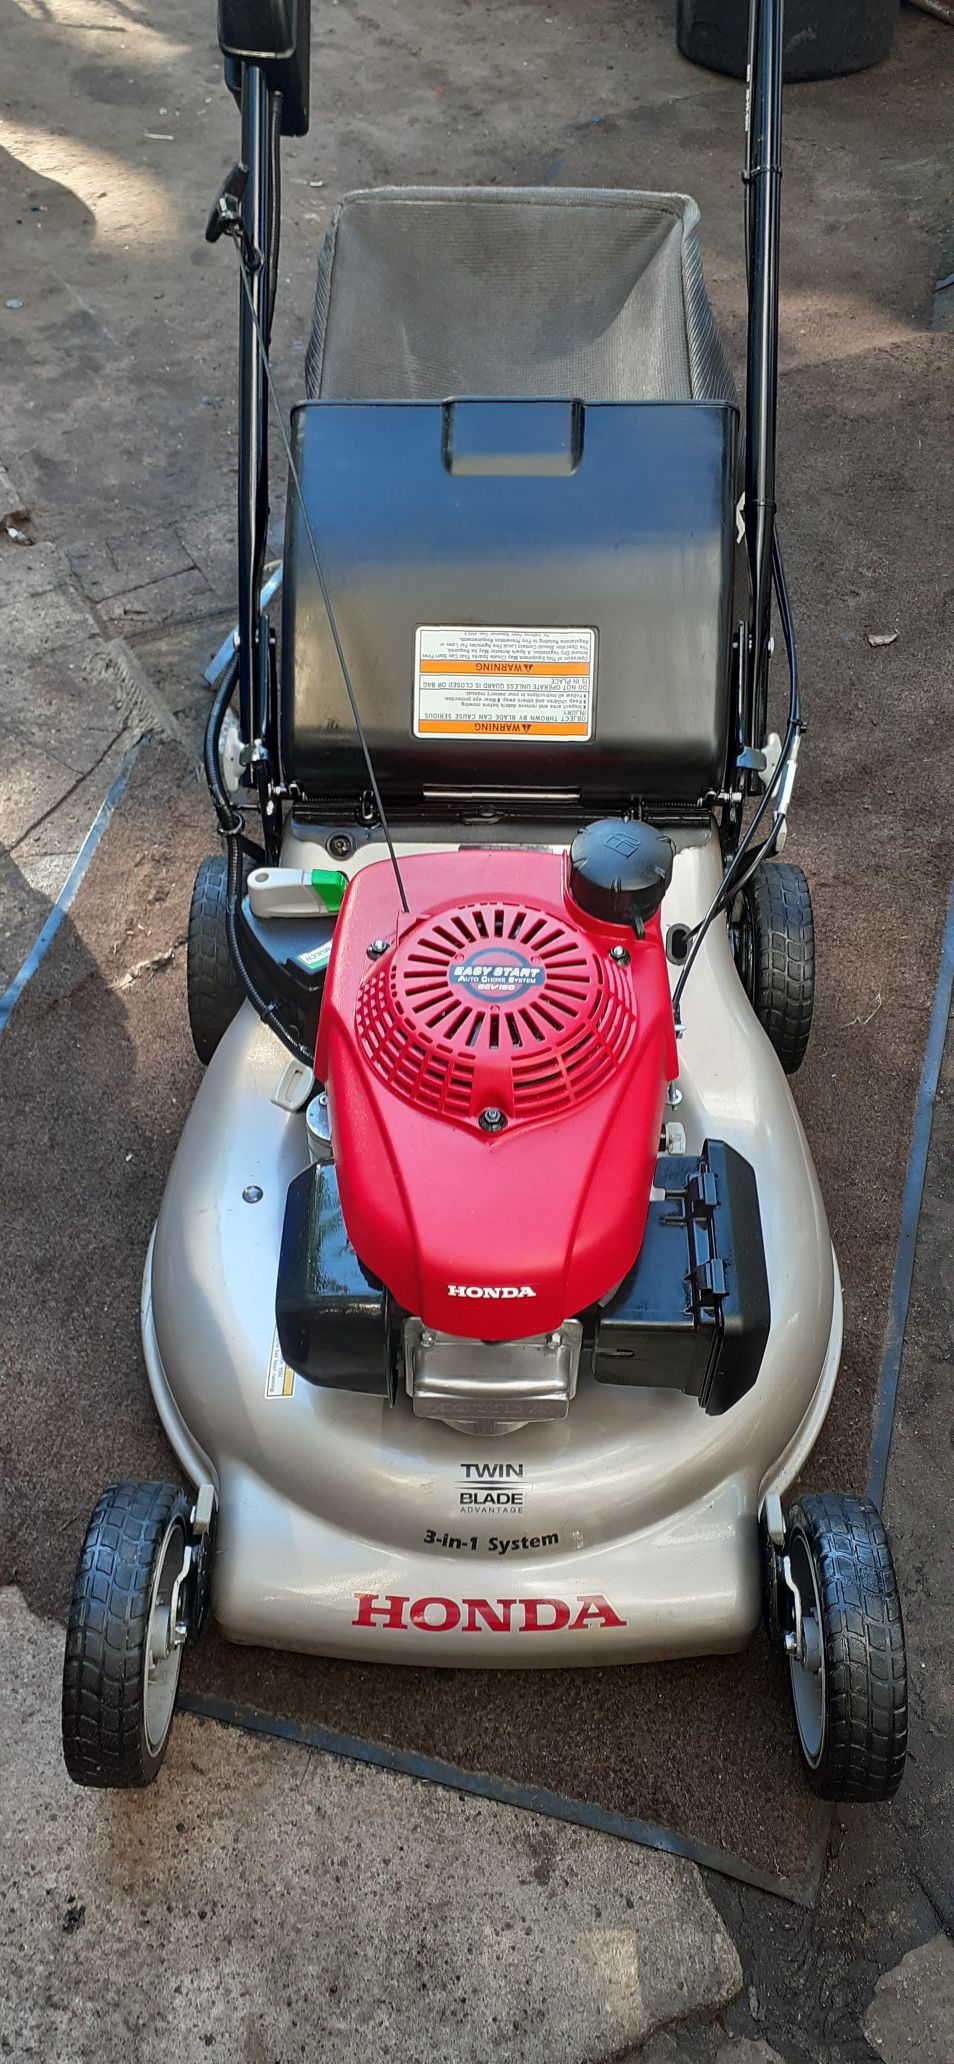 Honda self-propelled lawn mower with electric start